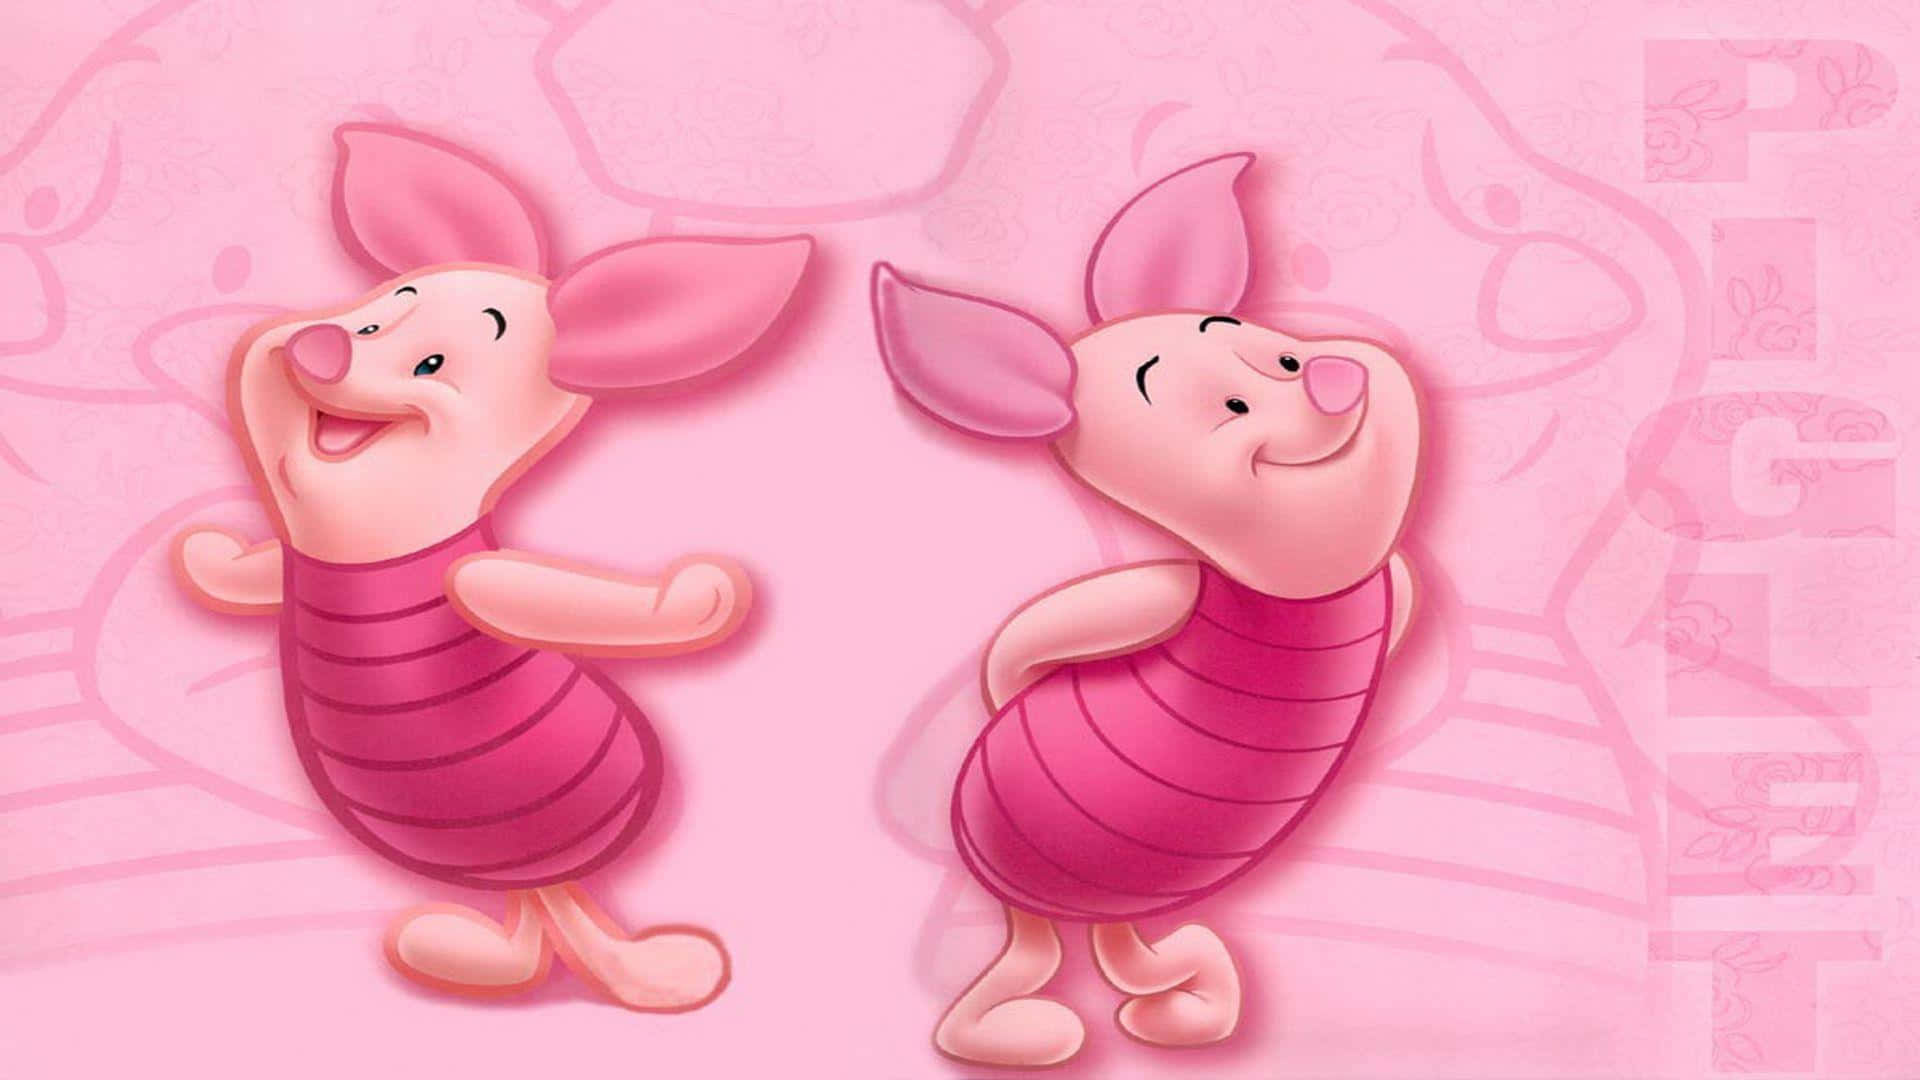 Piglet, a lovable and friendly character from Winnie the Pooh. Wallpaper